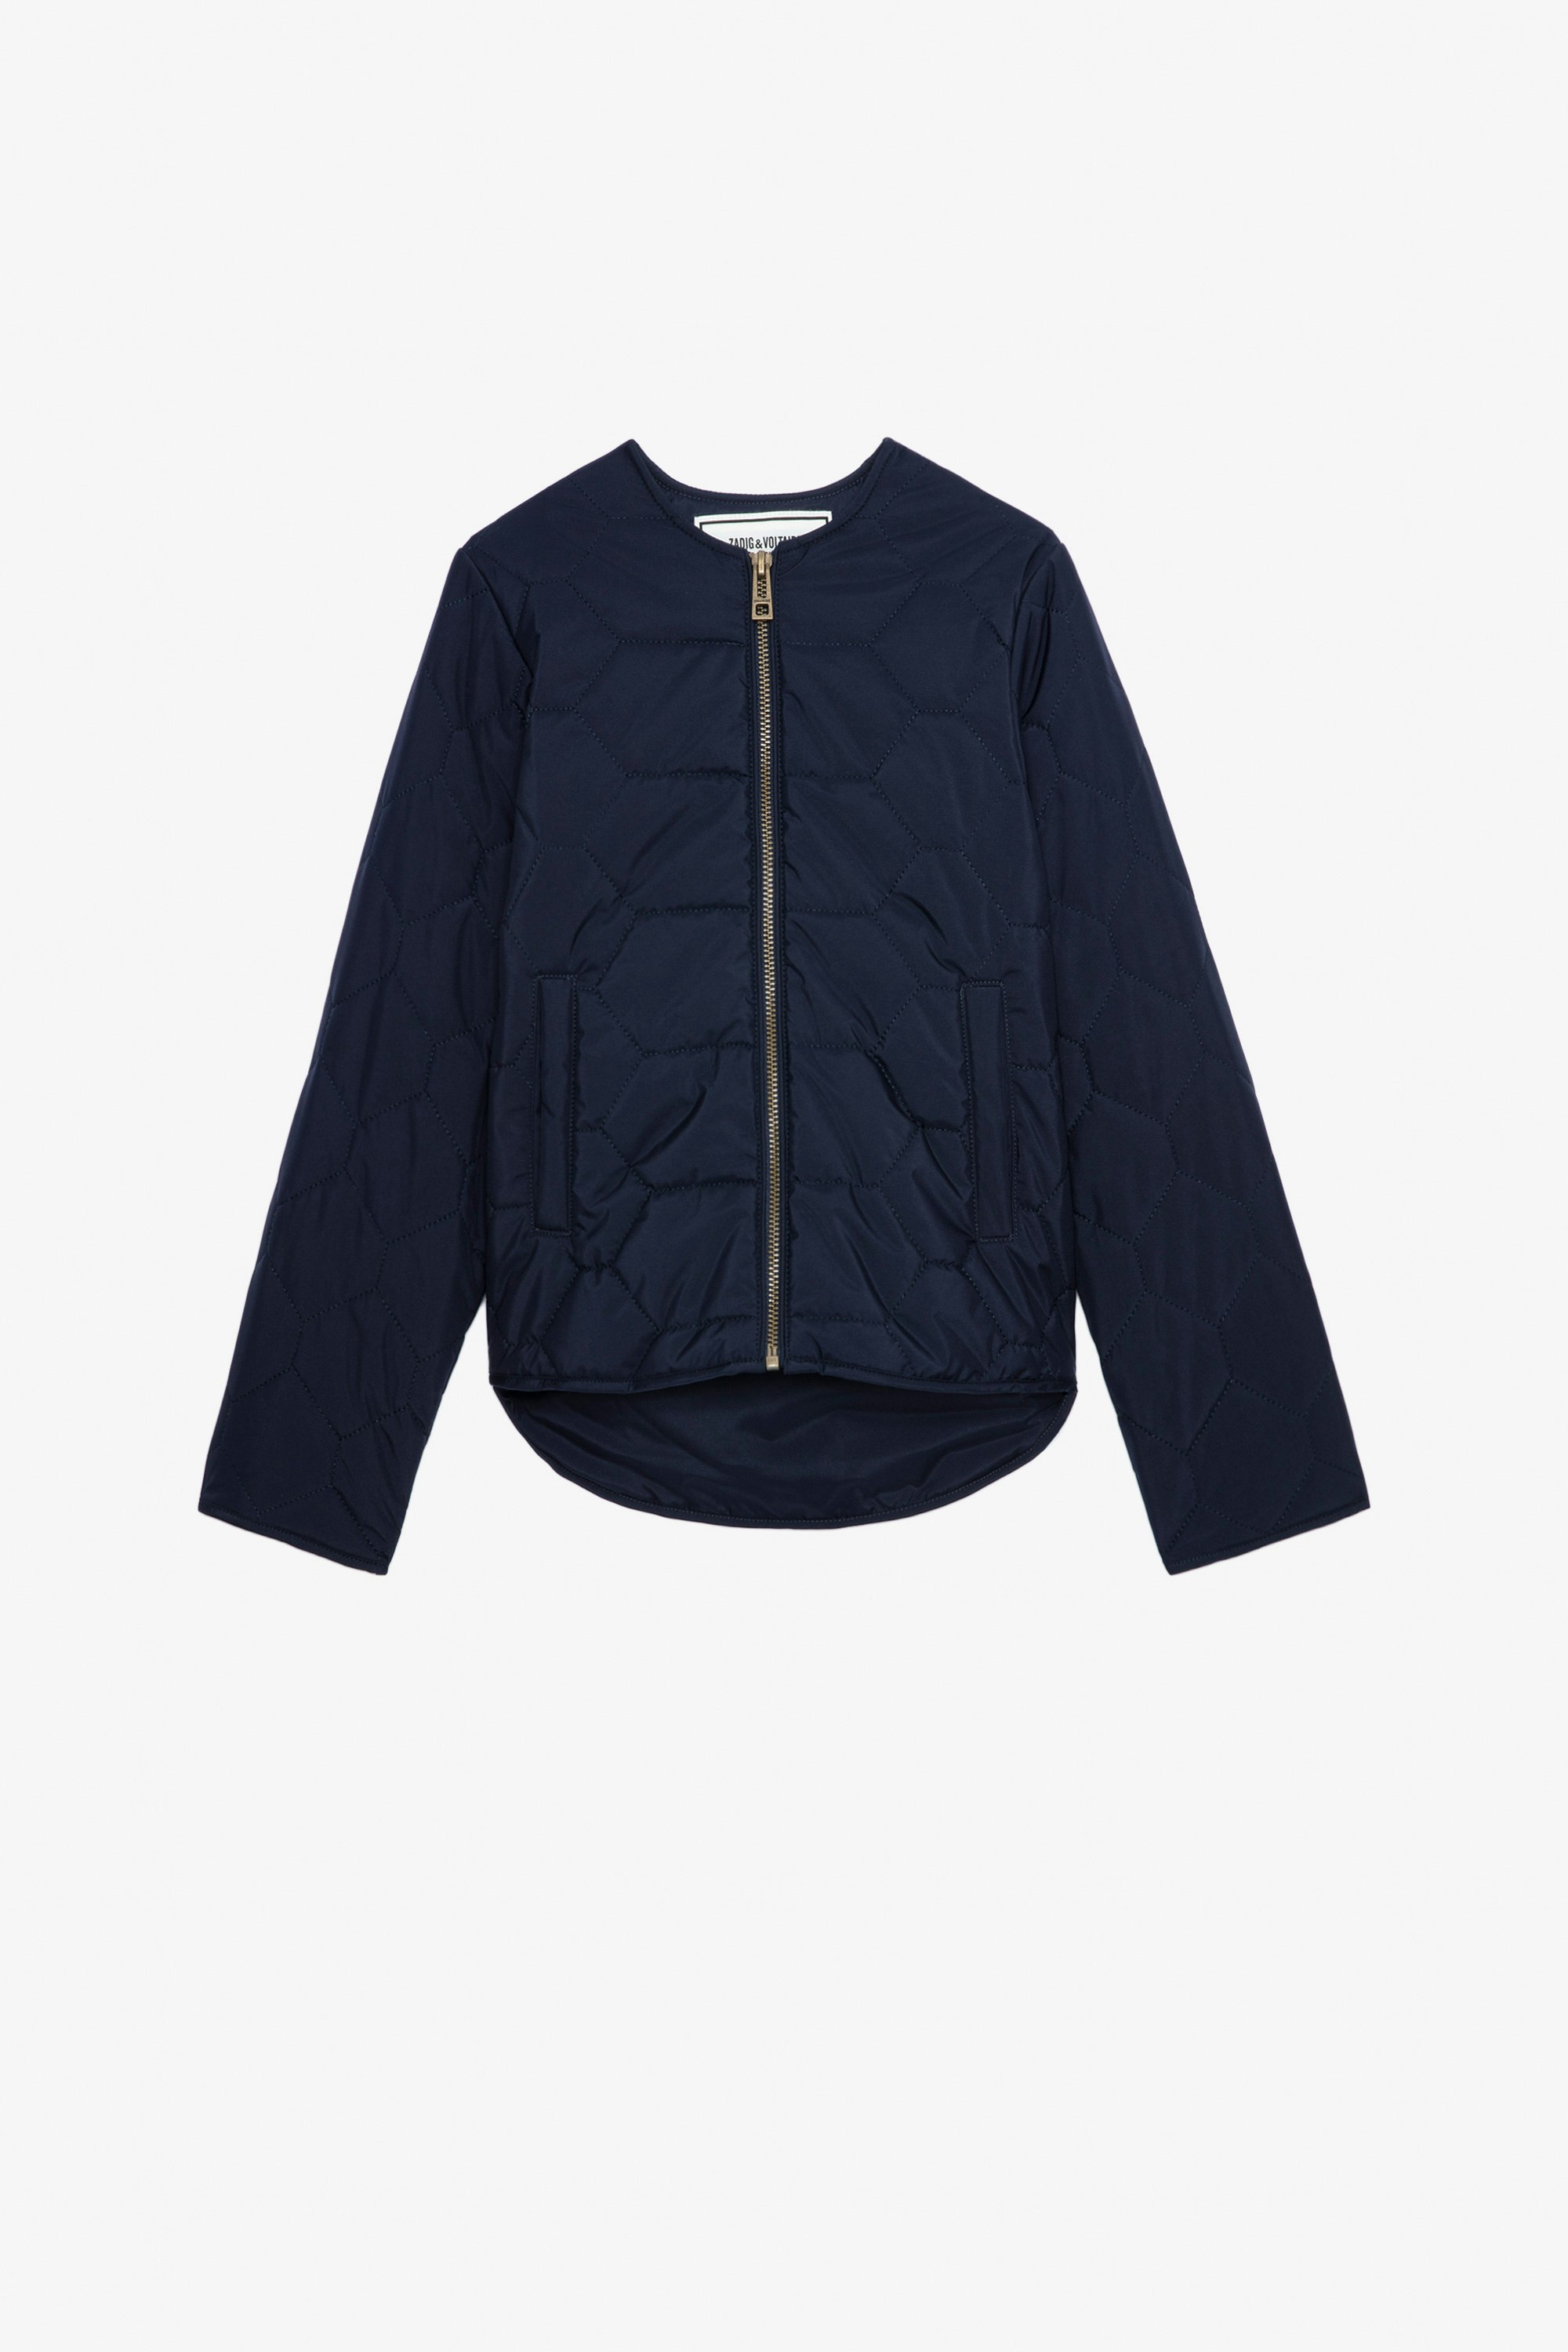 Girls’ Clide Jacket - Girls’ navy blue quilted recycled polyester jacket with “Bonheur” embroidery and wings.